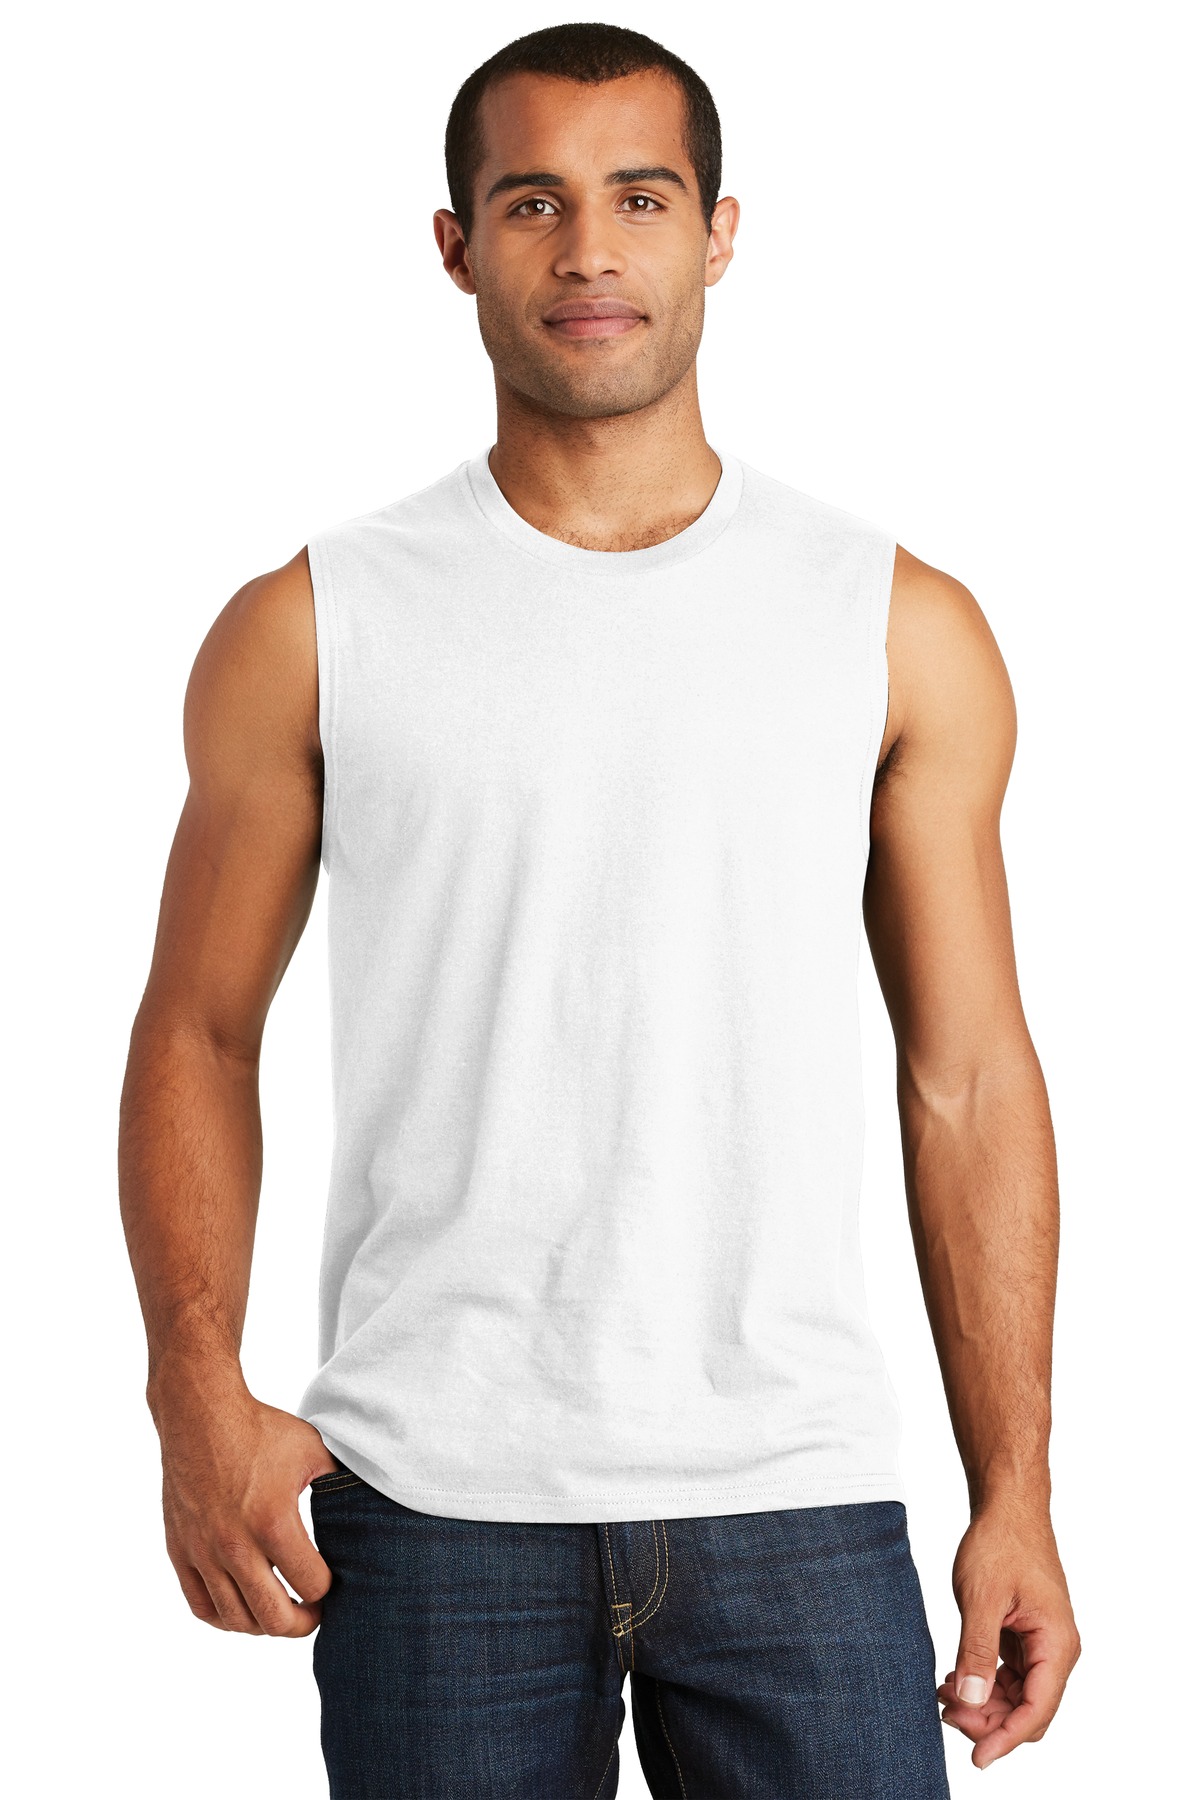 District  Young Mens V.I.T.   Muscle Tank. DT6300